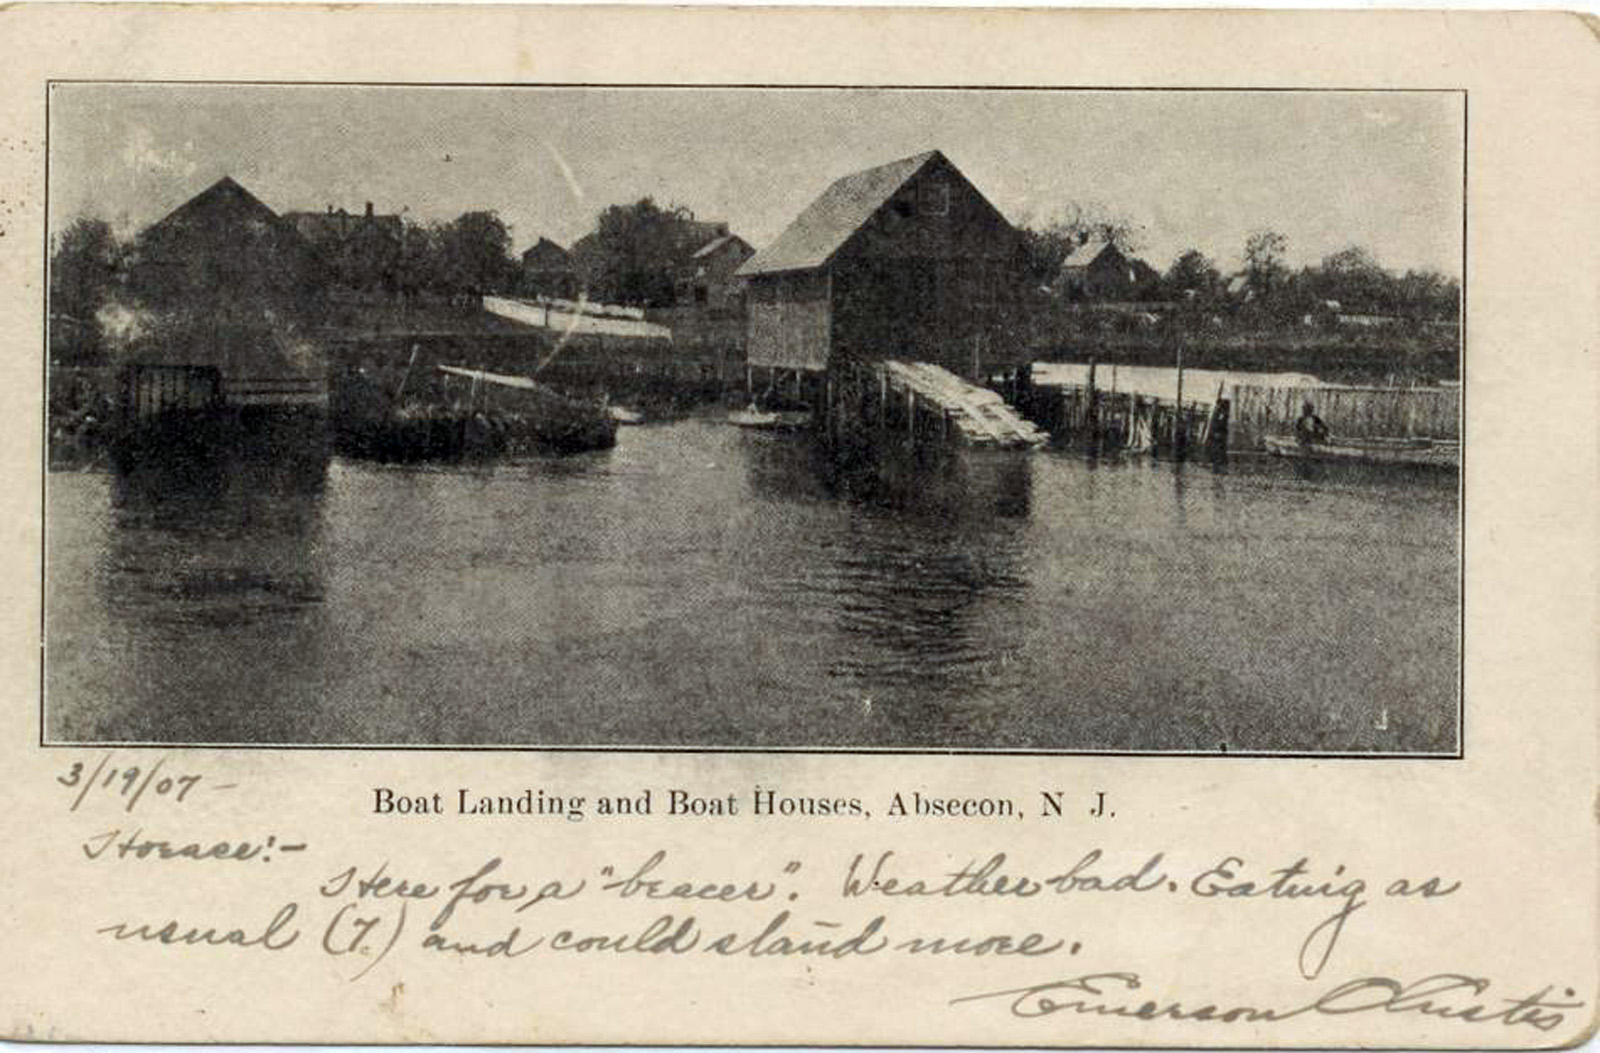 Absecon - Boat Landing and Boat Houses - c 1910 copy